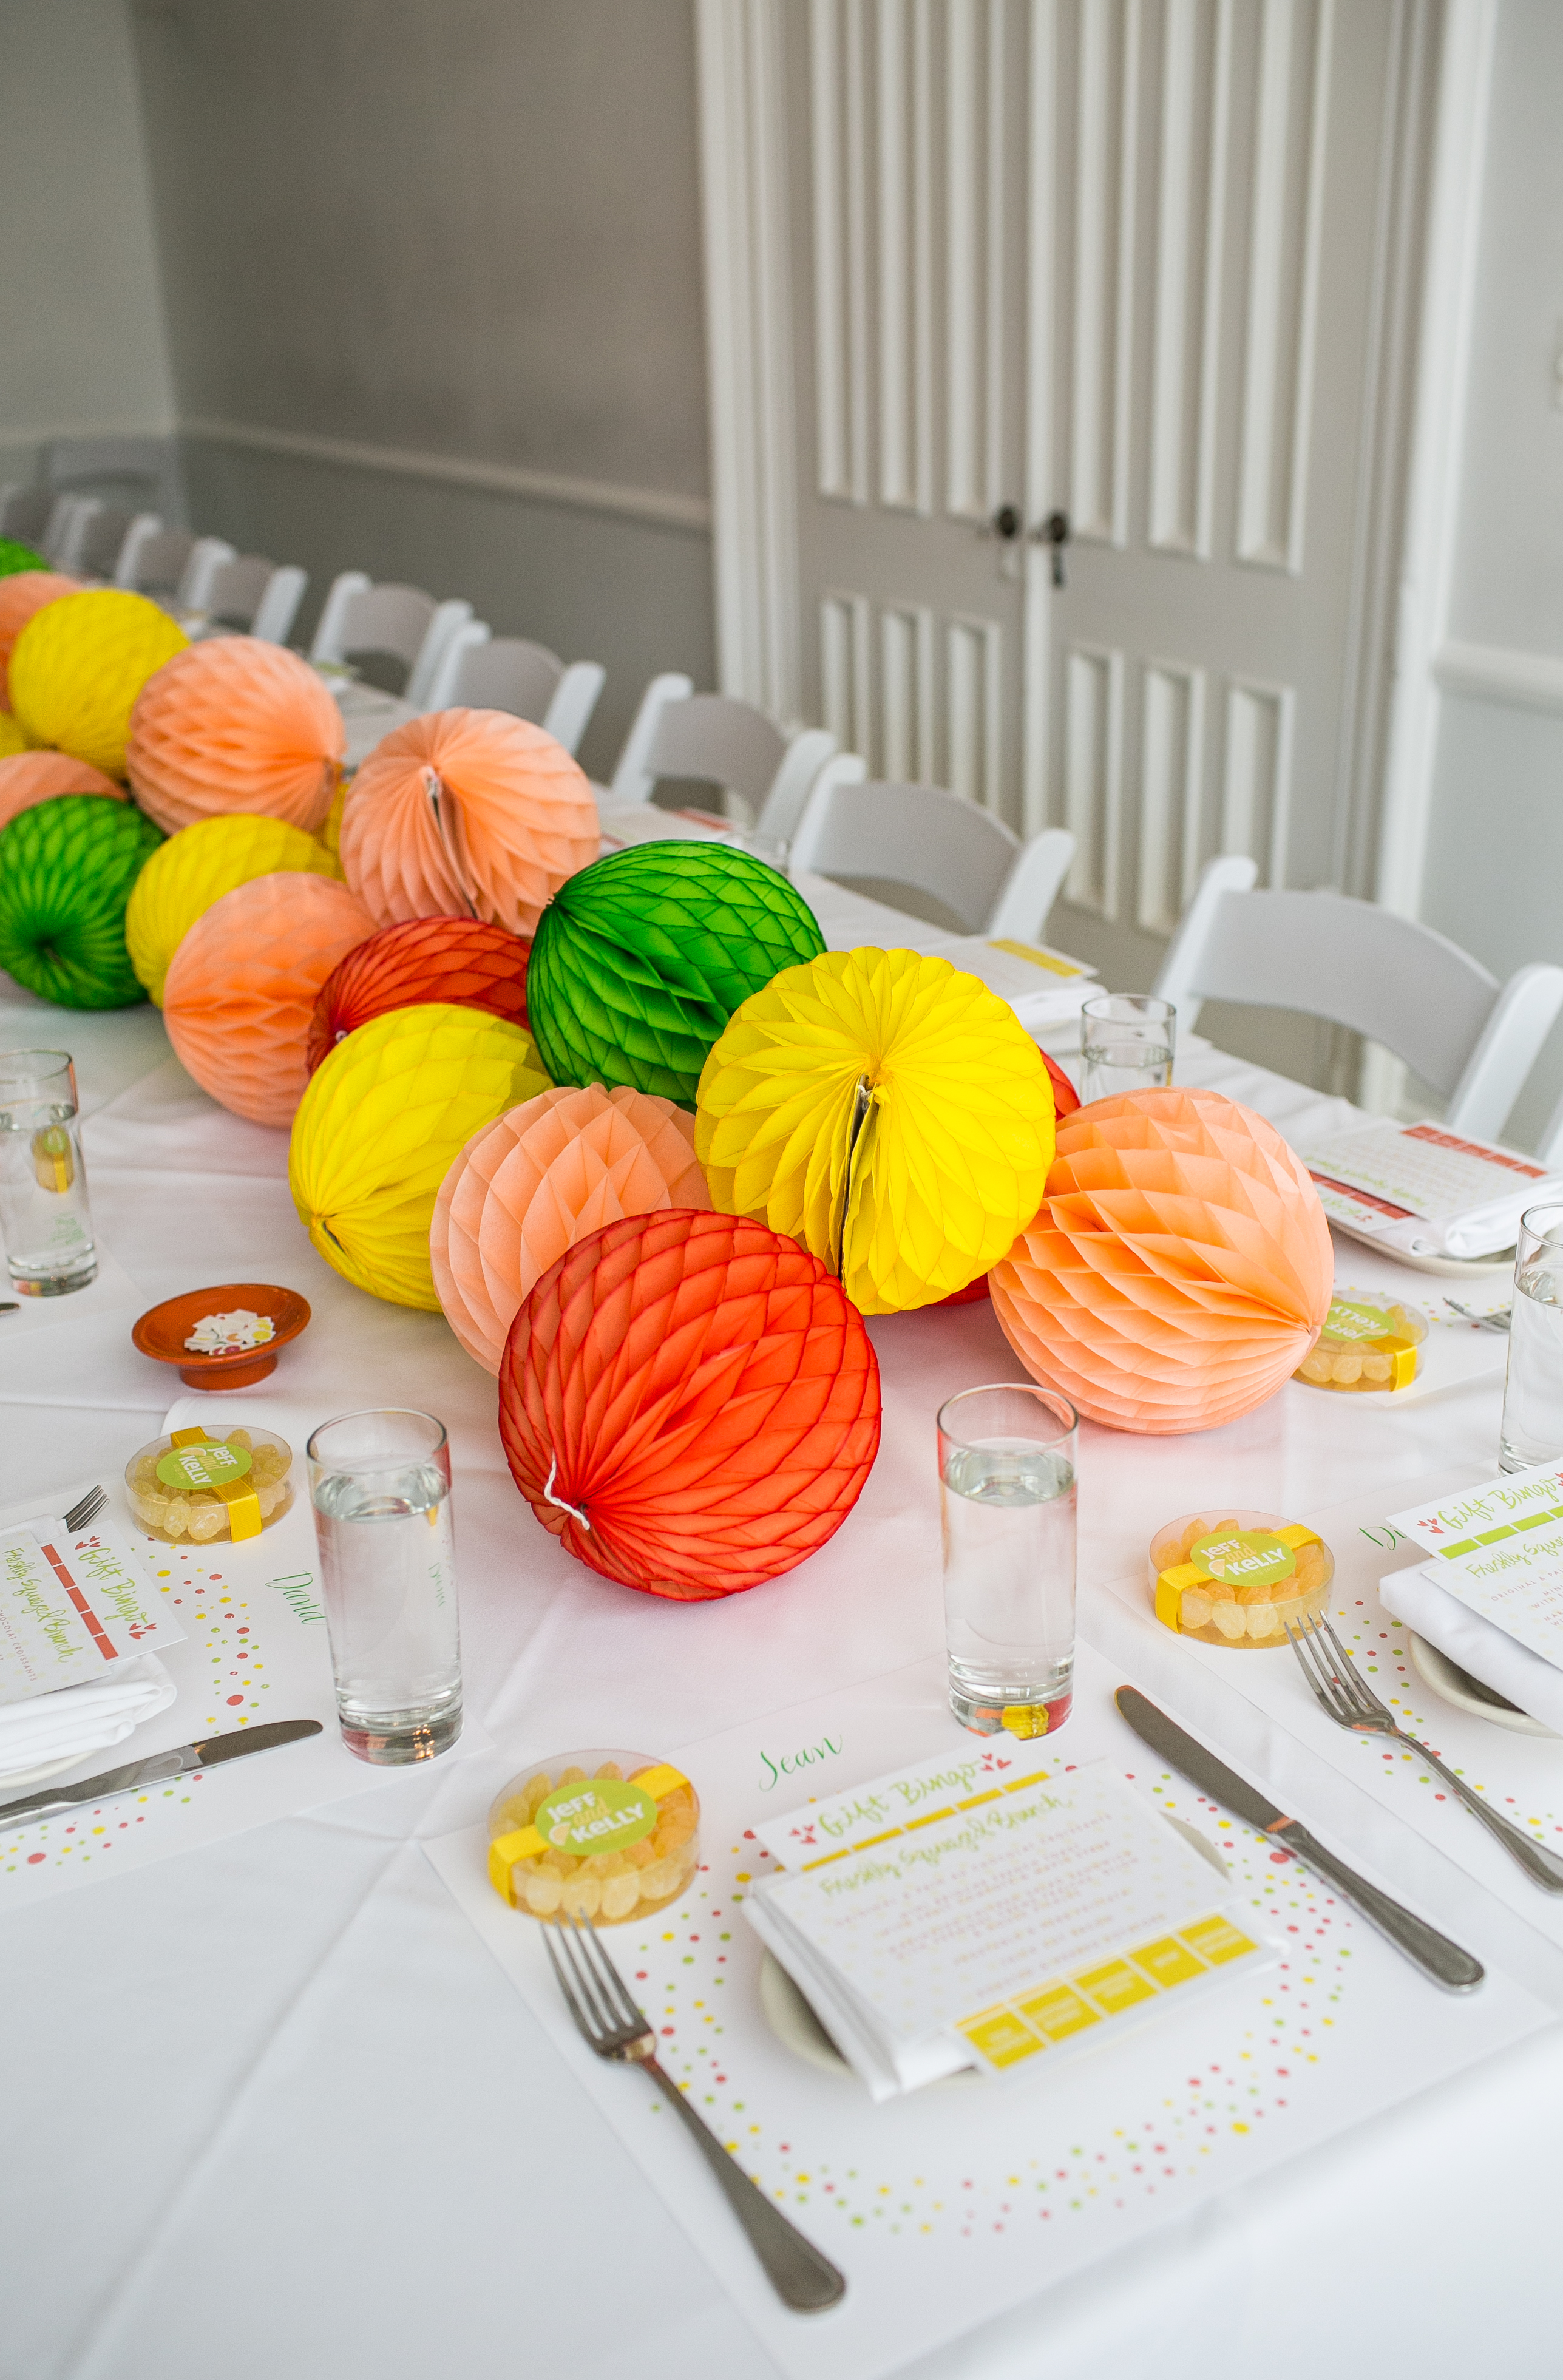 11a-bellwether-events-you-look-lovely-photography-9th-letter-press-citrus-inspired-pucker-up-theme-lemon-lime-grapefruit-orange-bridal-shower